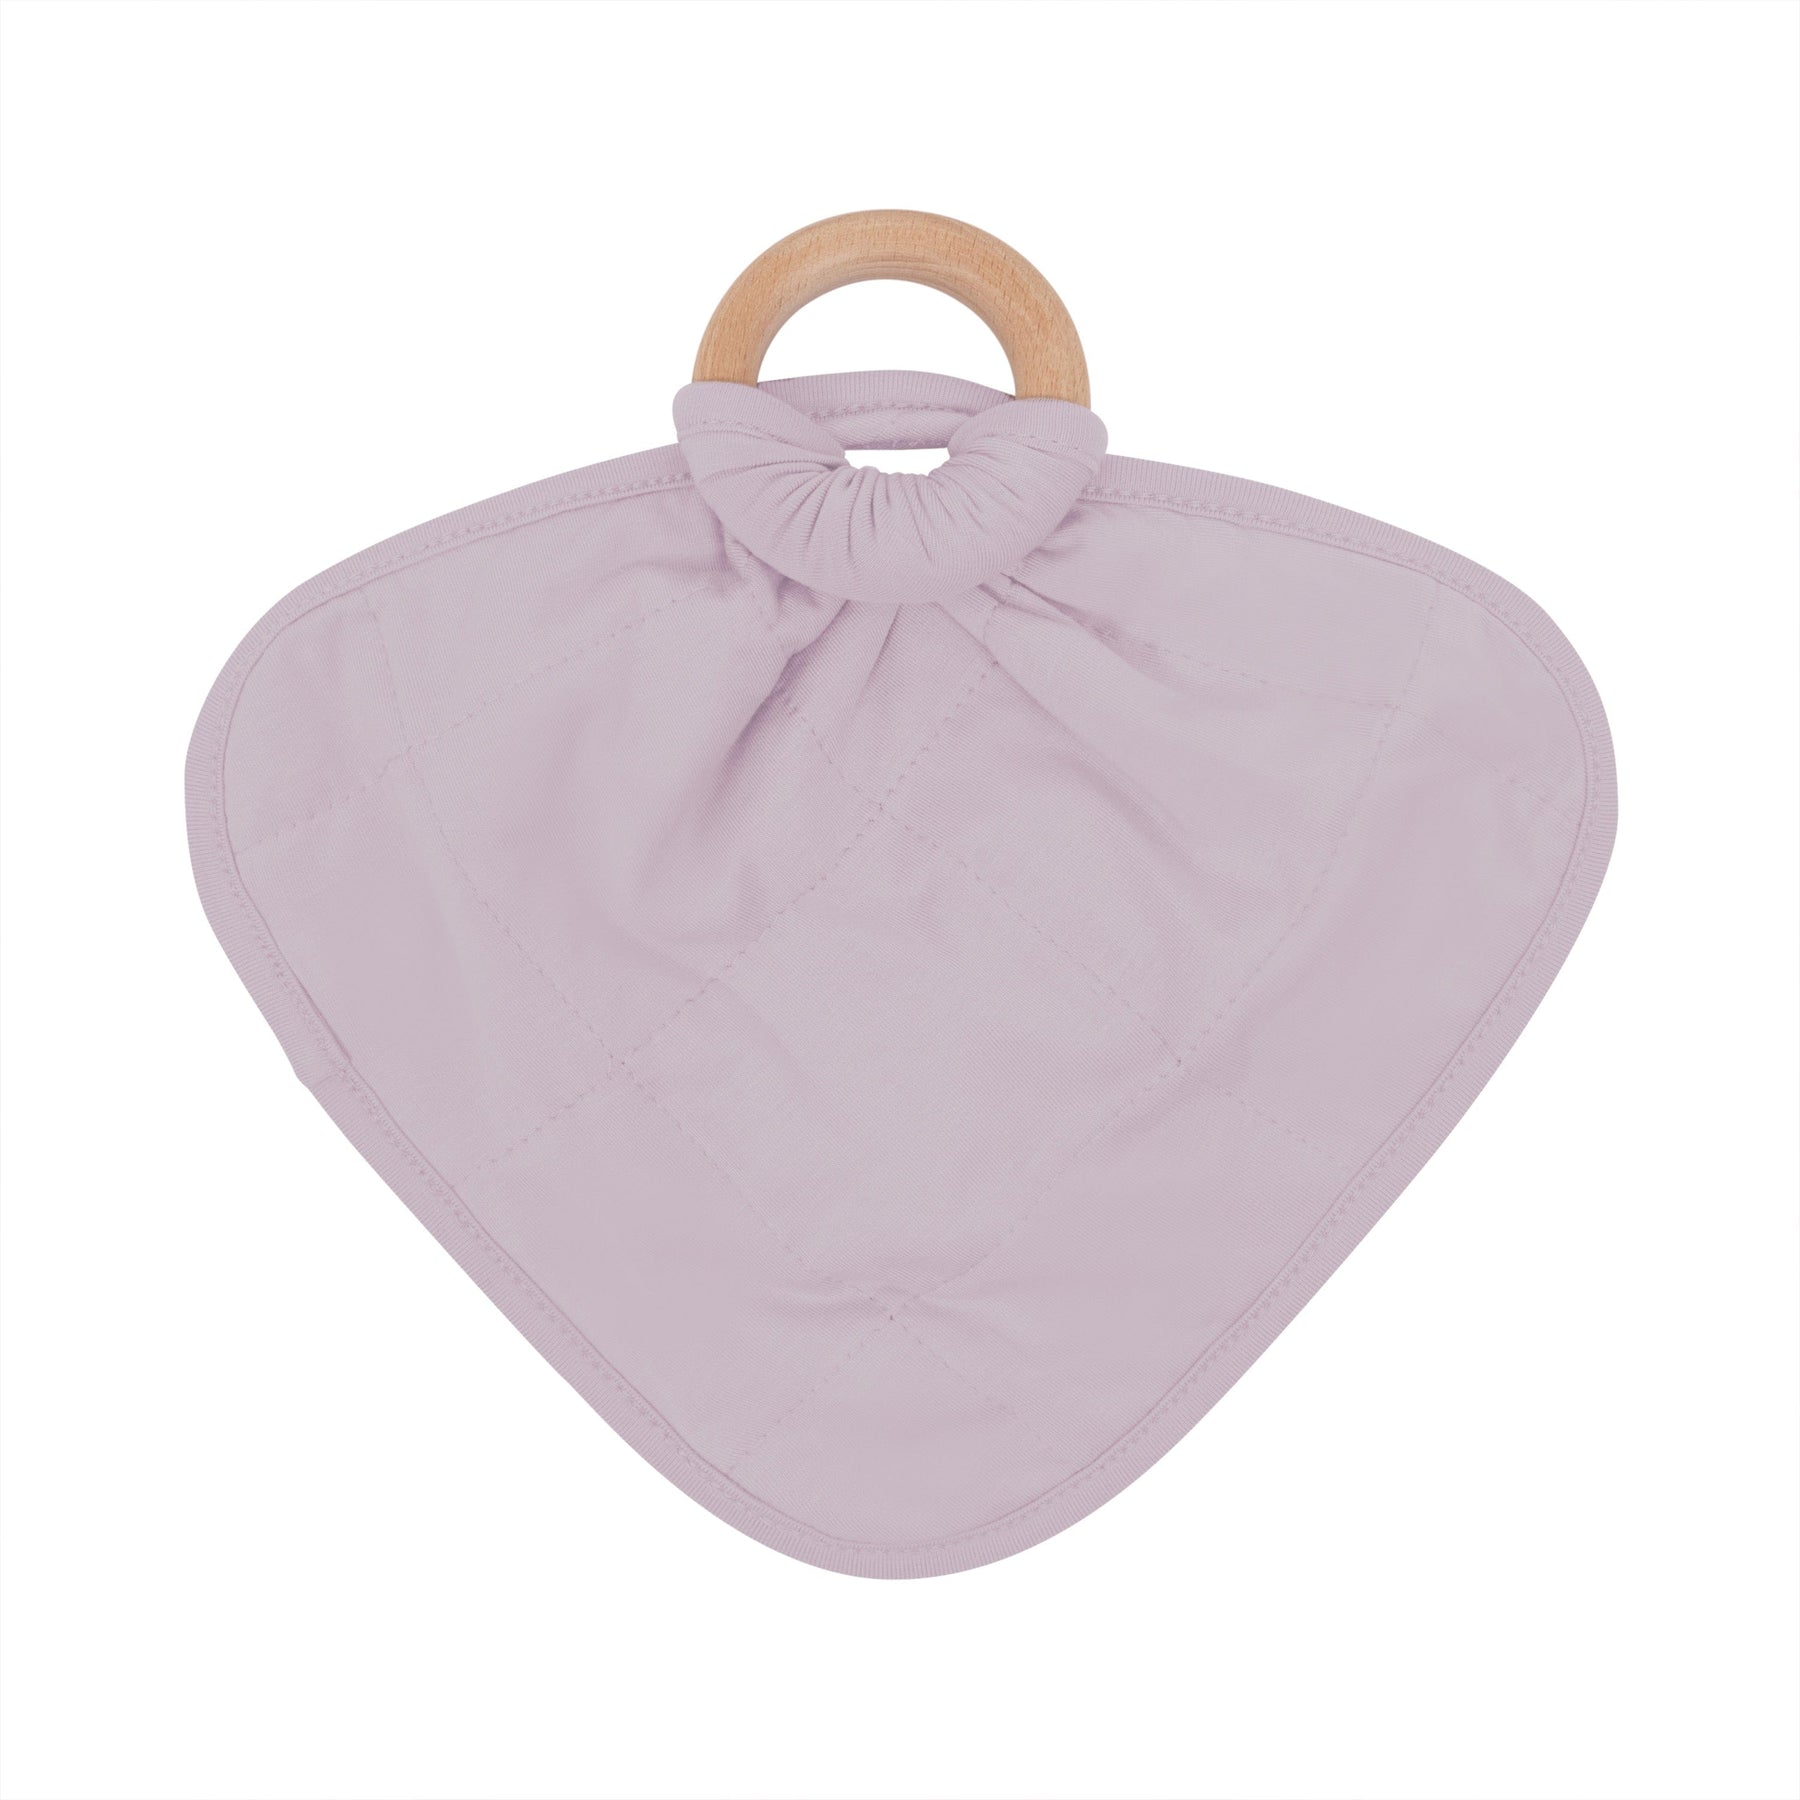 Kyte Baby Lovey Wisteria / Infant Lovey in Wisteria with Removable Teething Ring